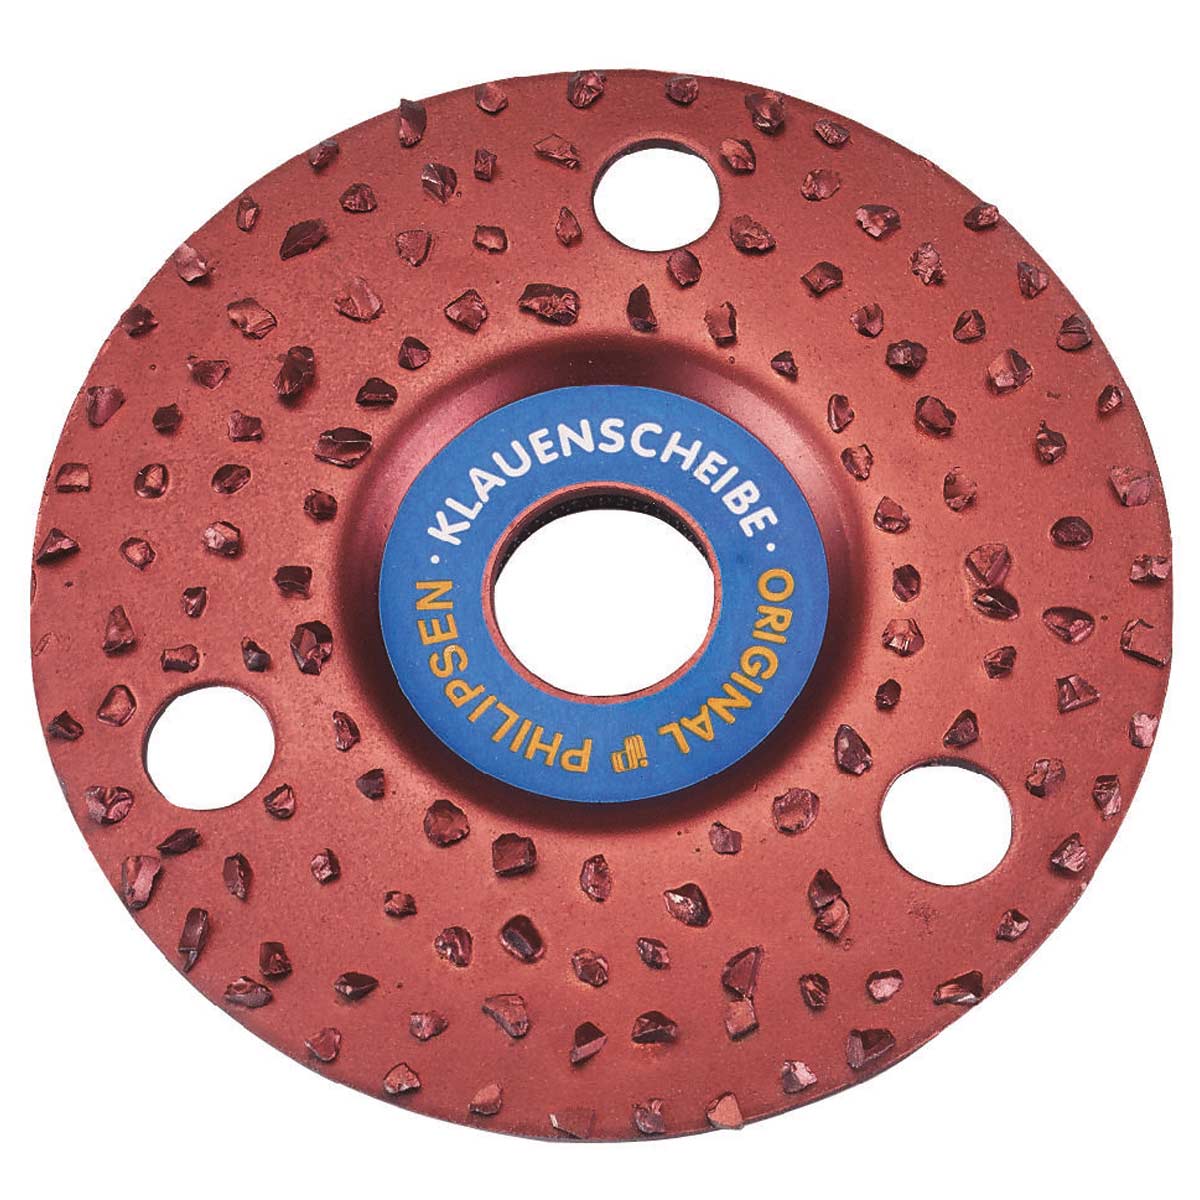 Super claw grinding wheel wide